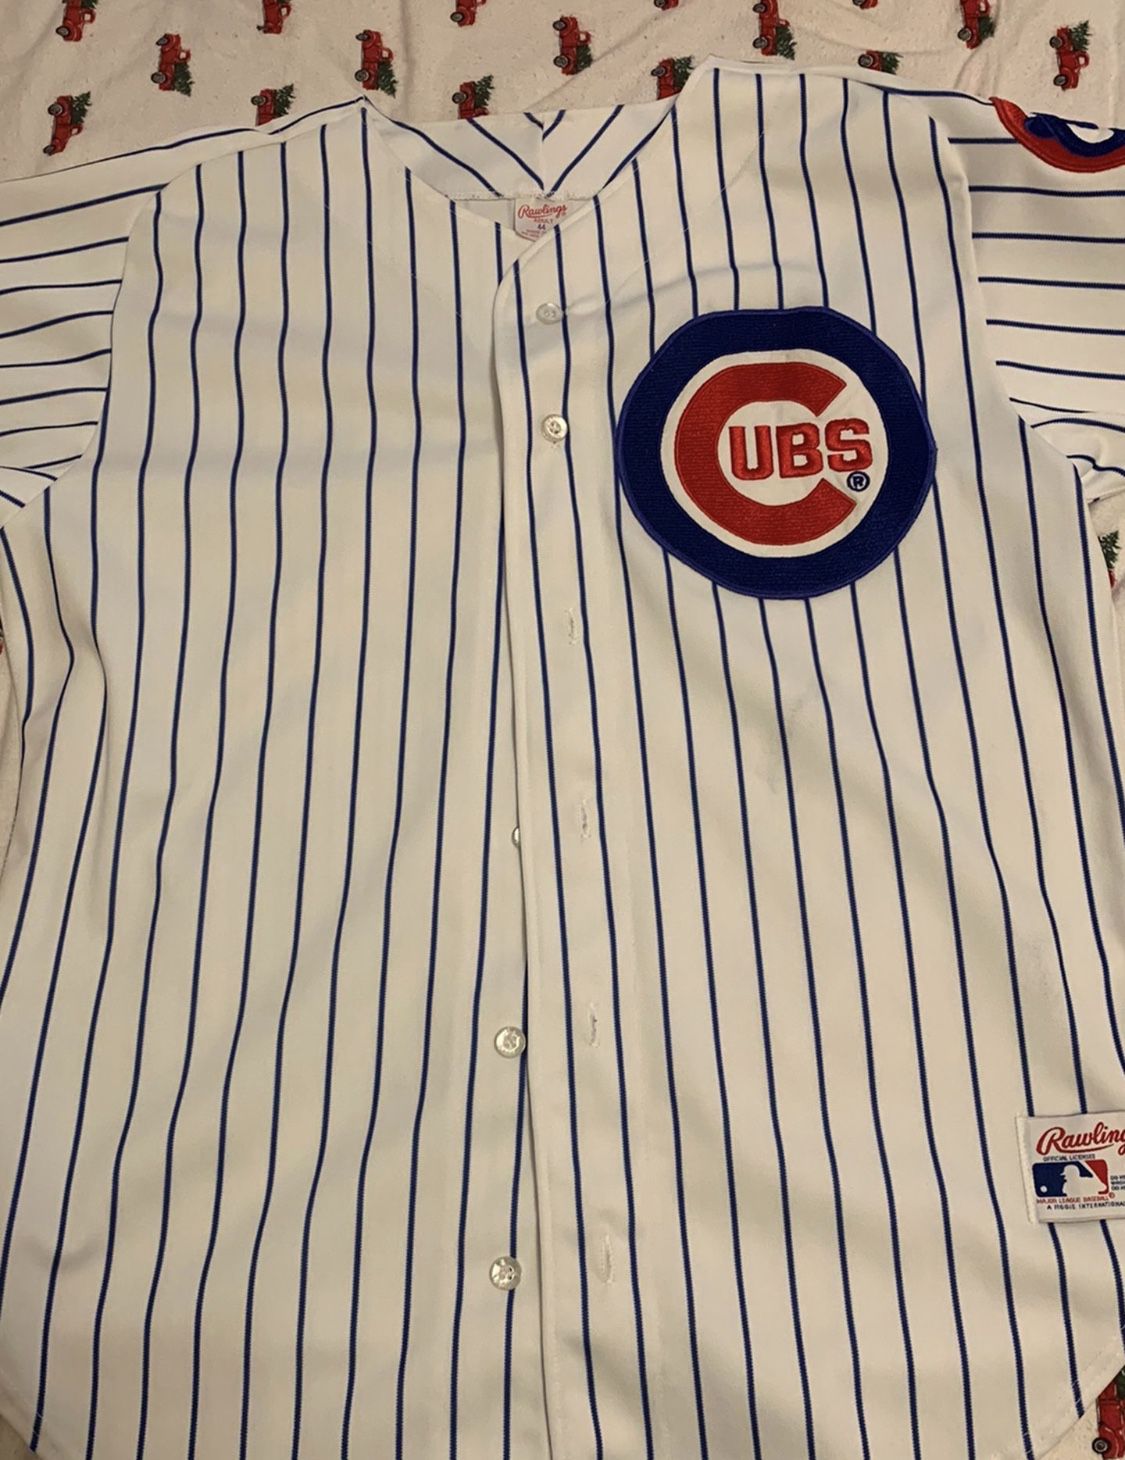 Vintage authentic 1980’s Chicago Cubs Rawlings jersey size 44